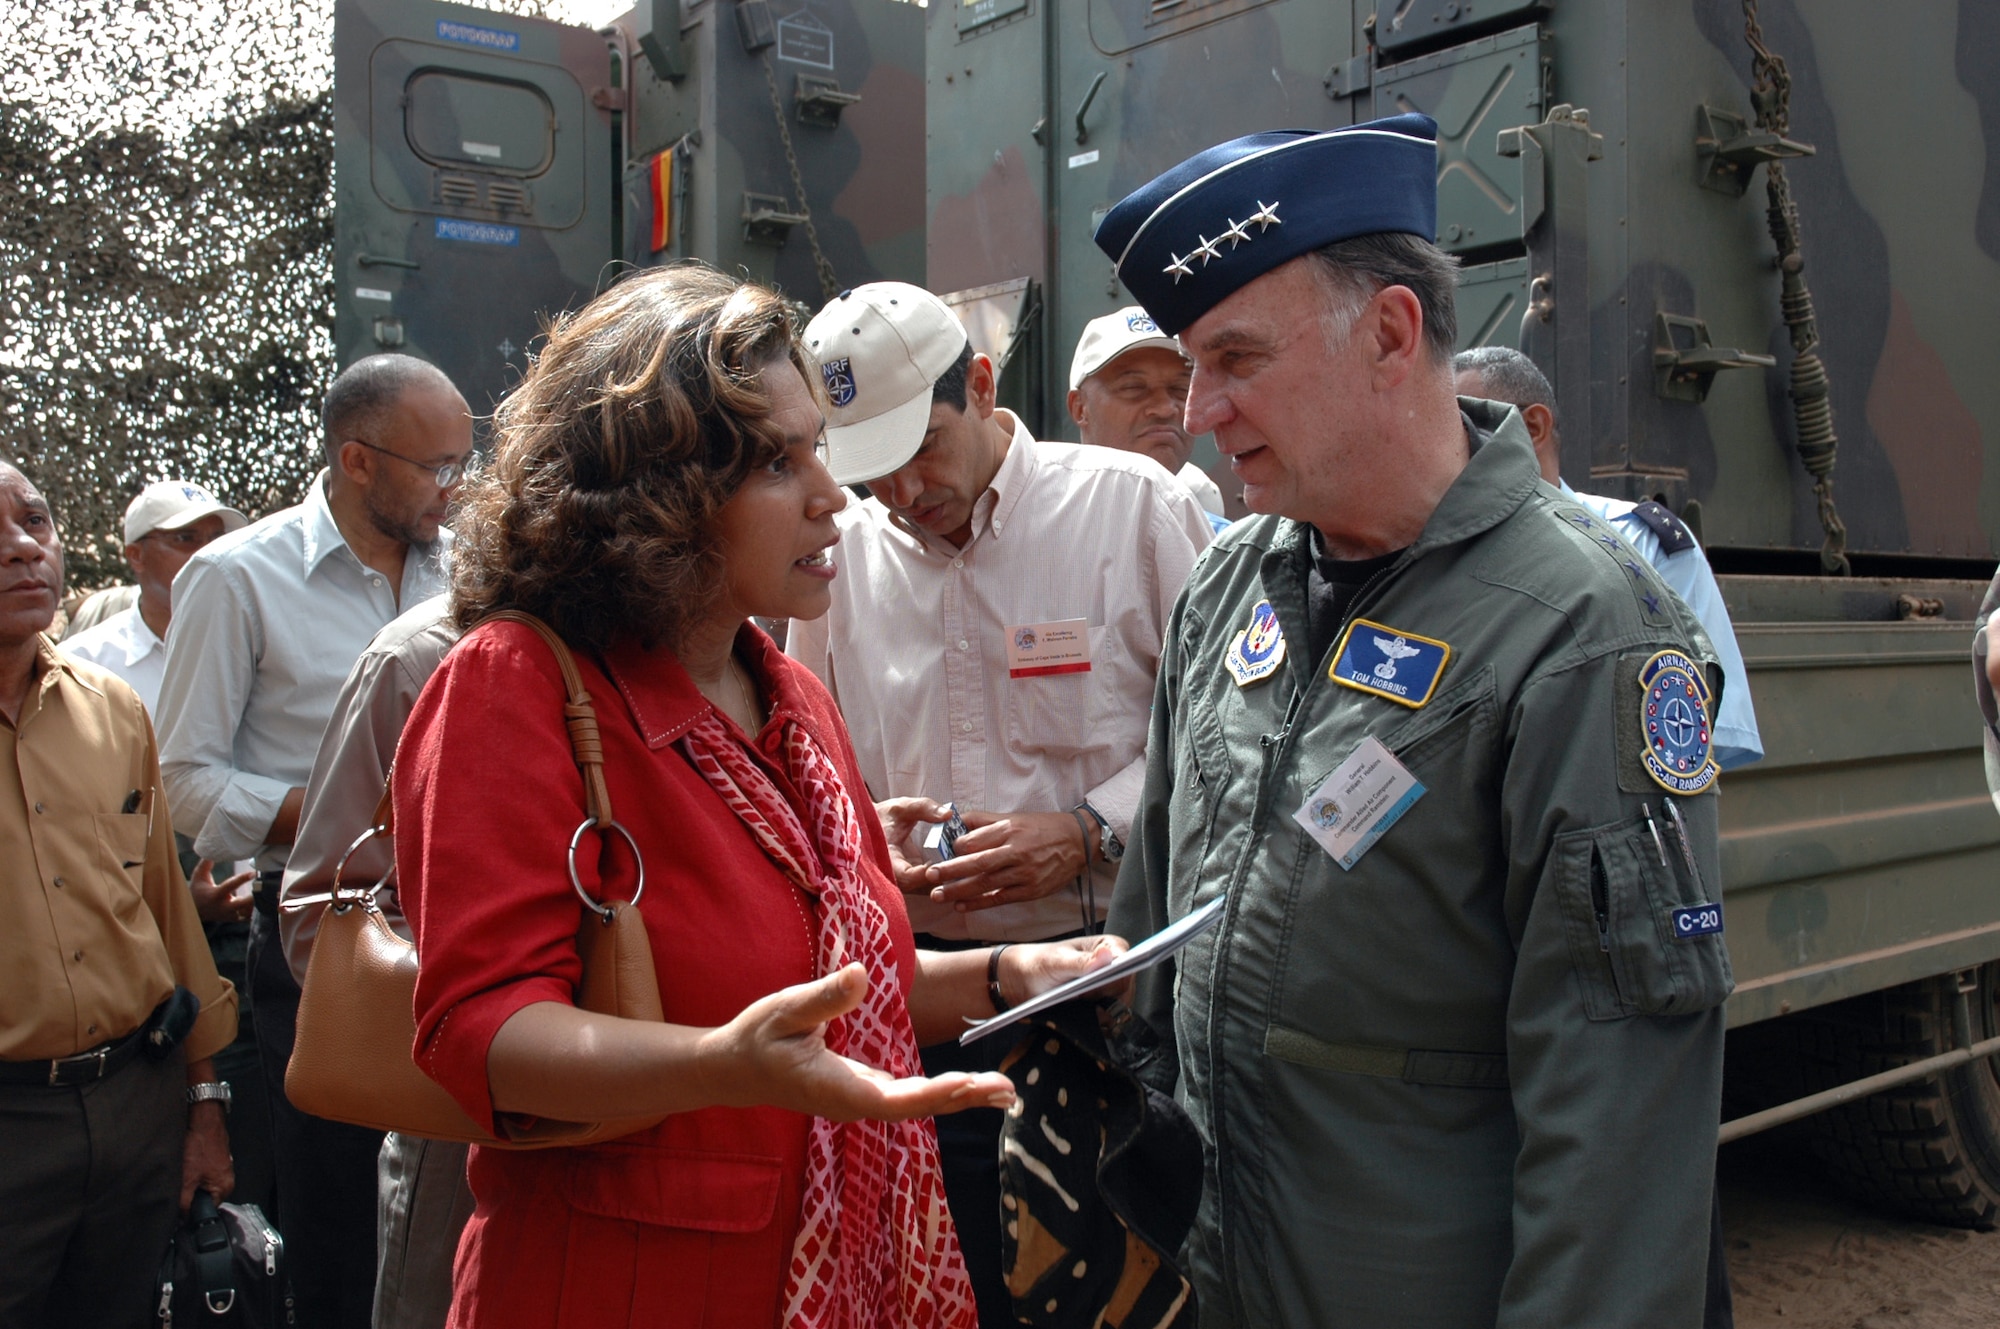 Gen. William T. Hobbins talks with Cristina Fontes Lima, Cape Verde Defense Minister, during a distinguished visitor day for Exercise Steadfast Jaguar in Sao Vicente, Cape Verde, on Friday, June 23. More than 7,000 NATO servicemembers from land, maritime and air components are participating in the exercise, which ends today. General Hobbins is the commander of U.S. Air Forces Europe, and Air Component Command Ramstein, as well as director of the Joint Air Power Competency Center at Ramstein Air Base, Germany. (U.S. Air Force photo/Capt. Krista Carlos)